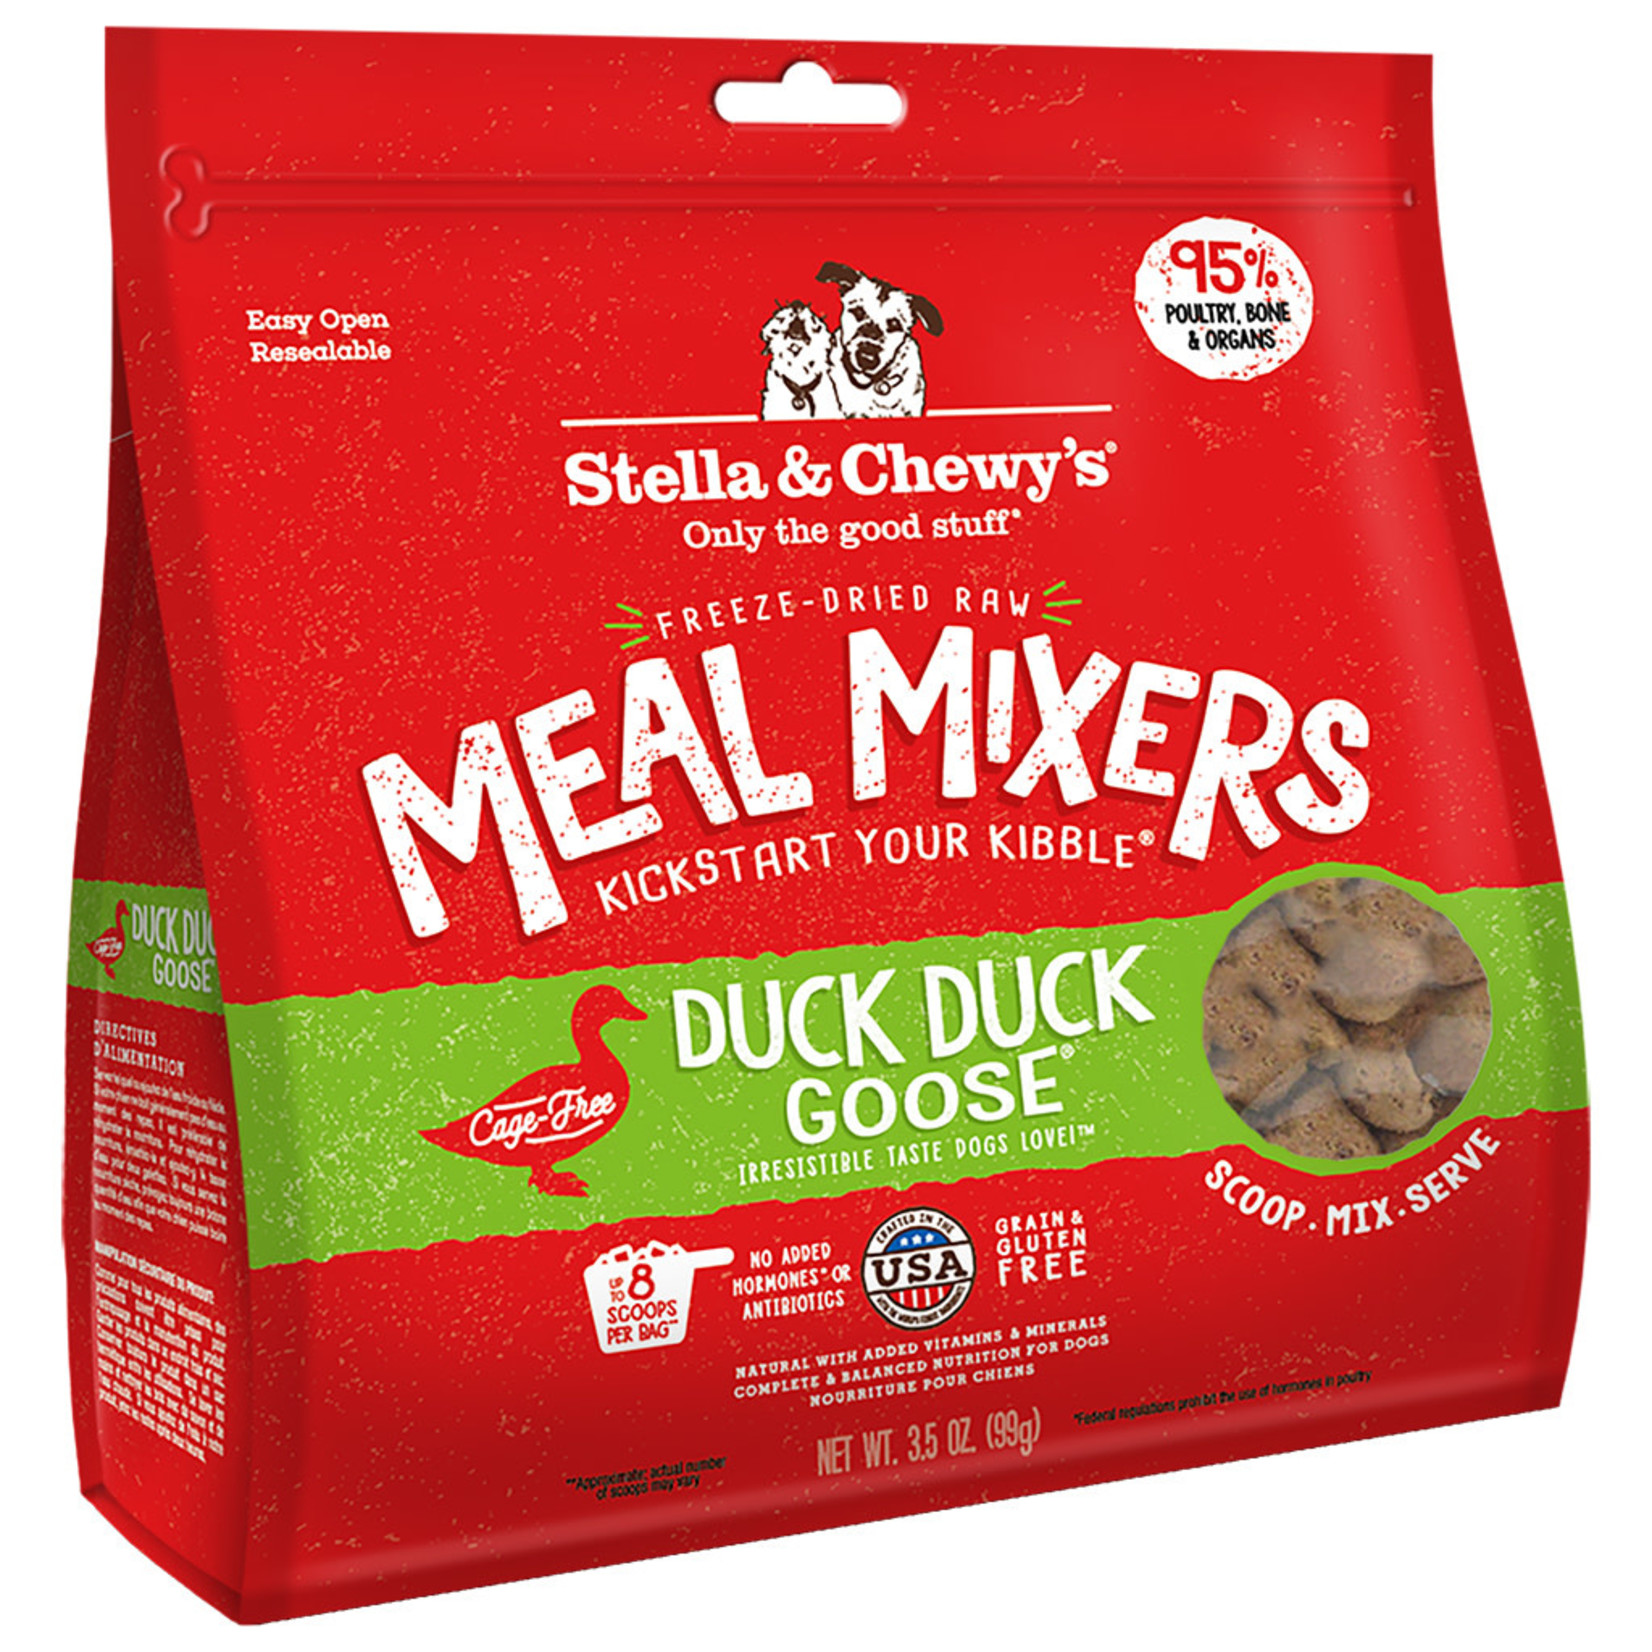 Stella & chewy's Stella & Chewy's Duck Duck Goose Meal Mixers 3.5OZ